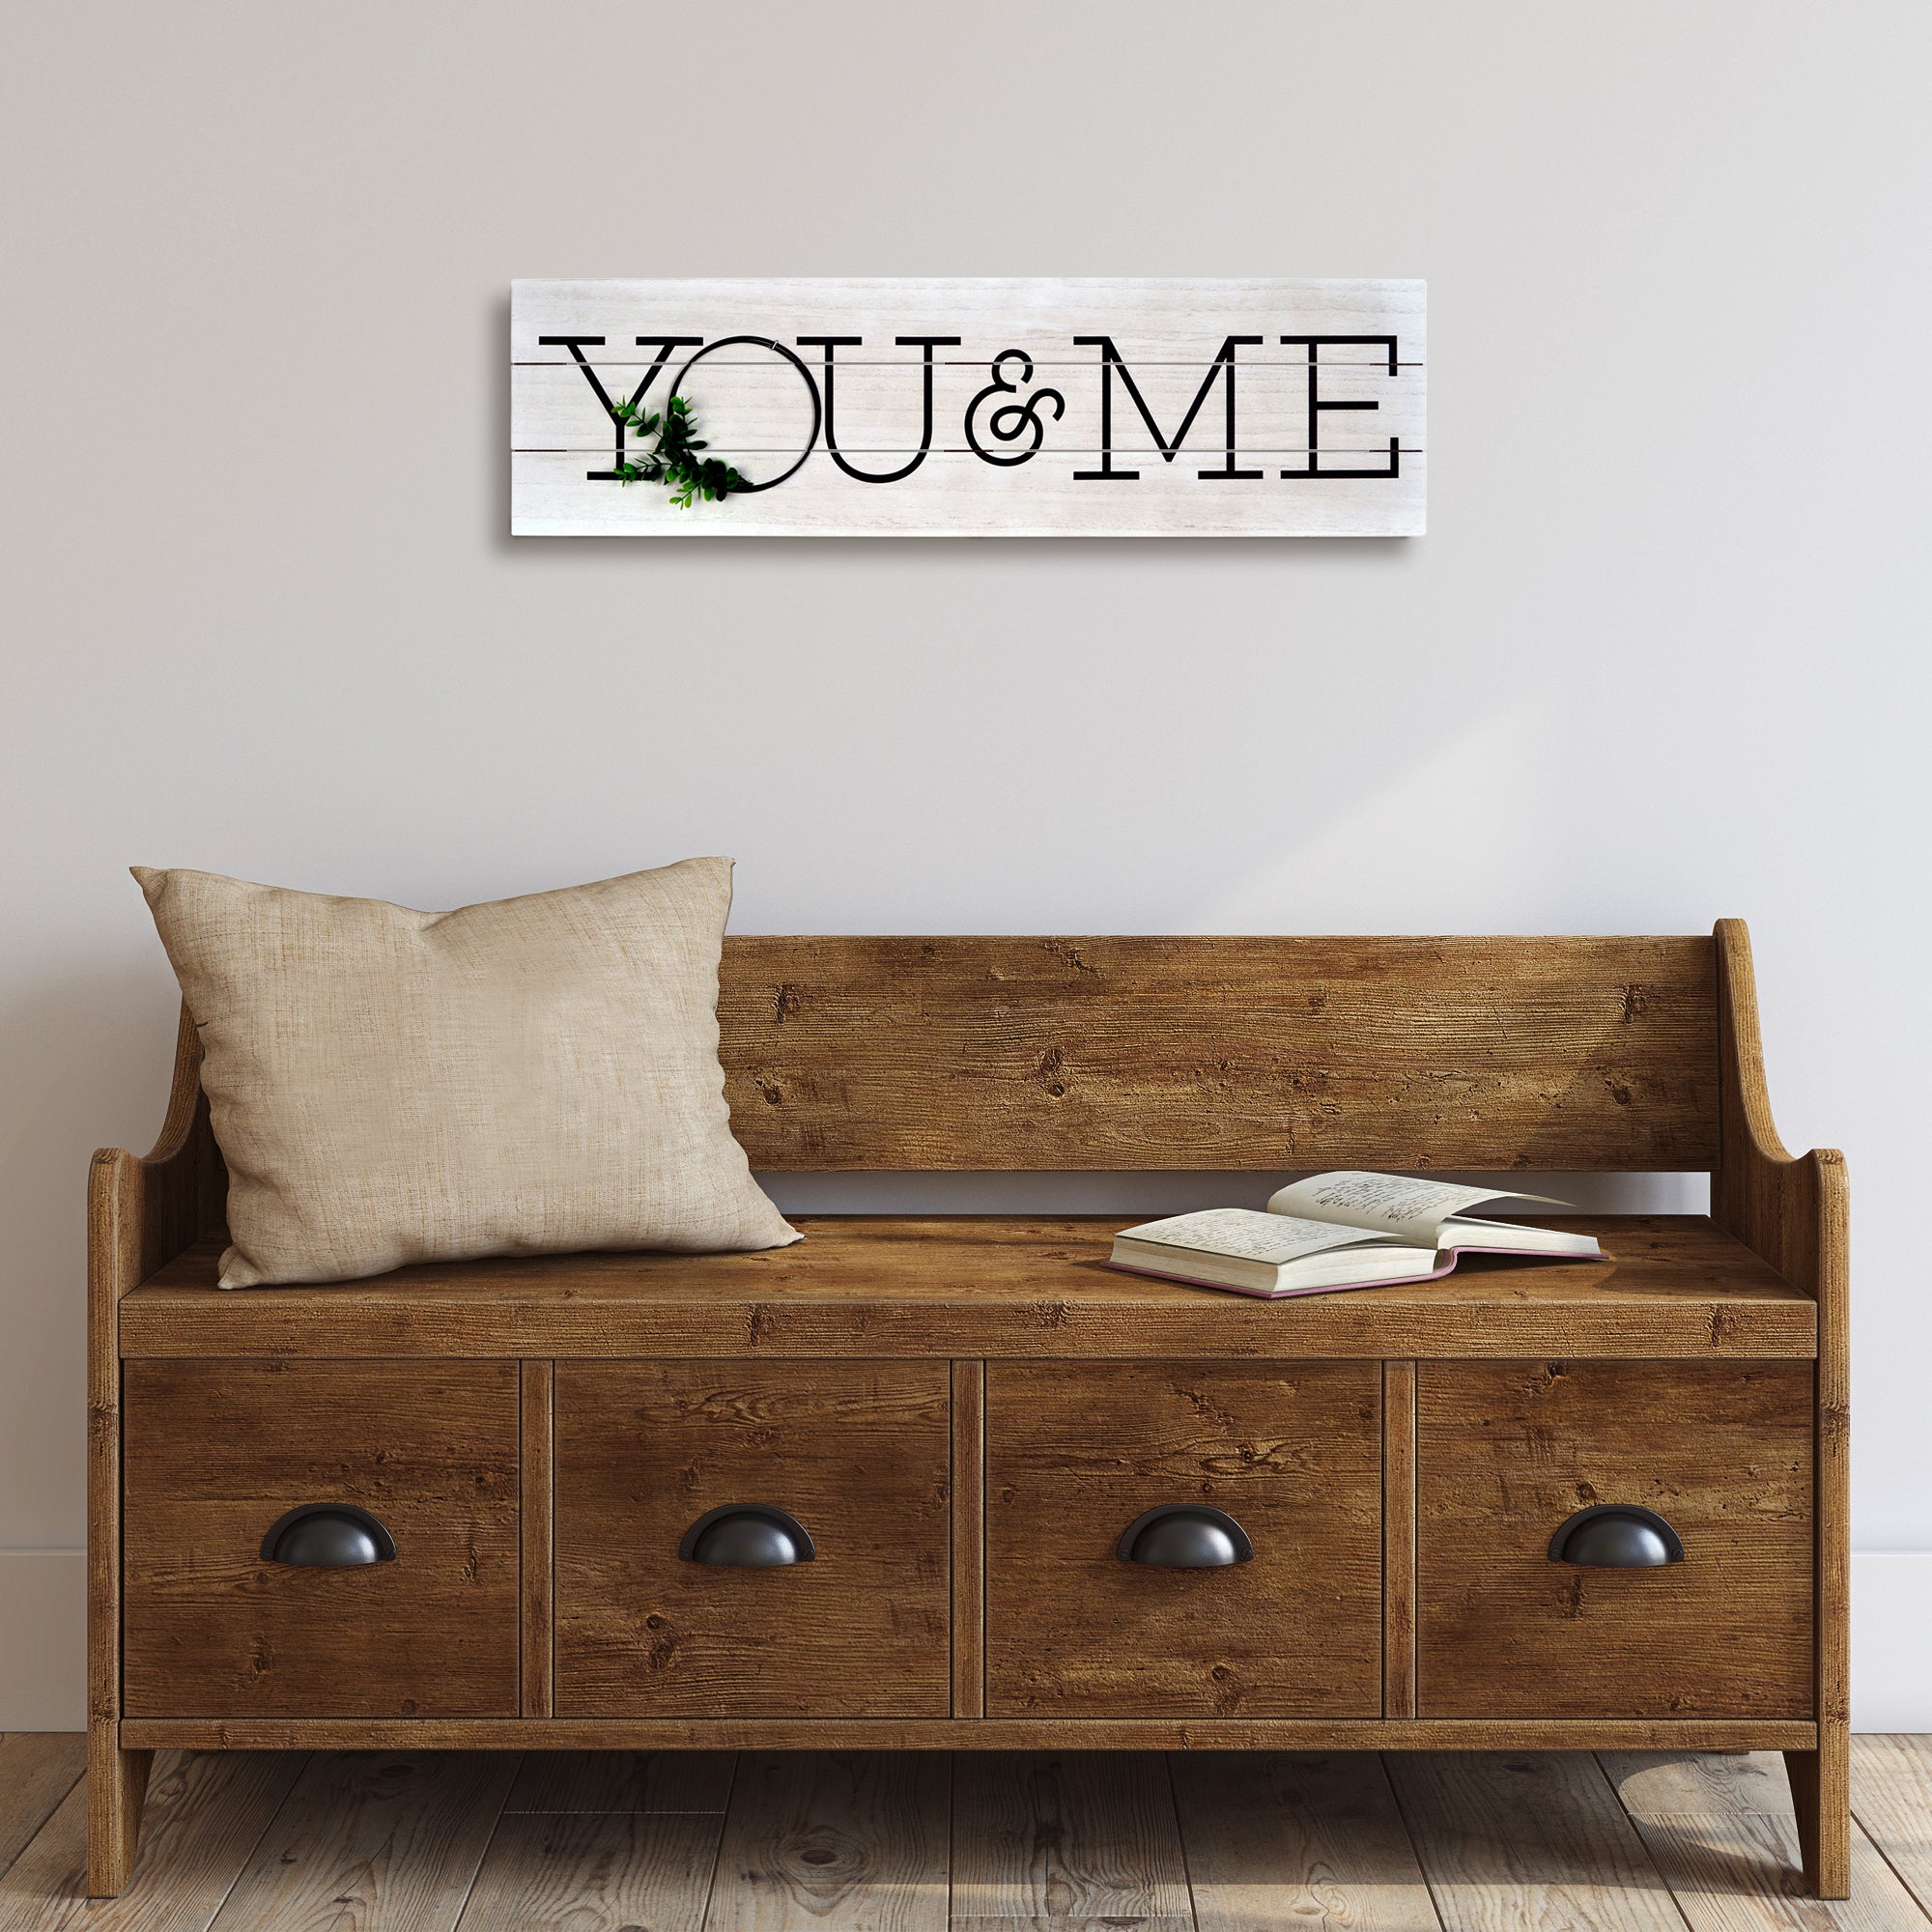 You & Me Rustic Plank Whitewashed Wall Sign